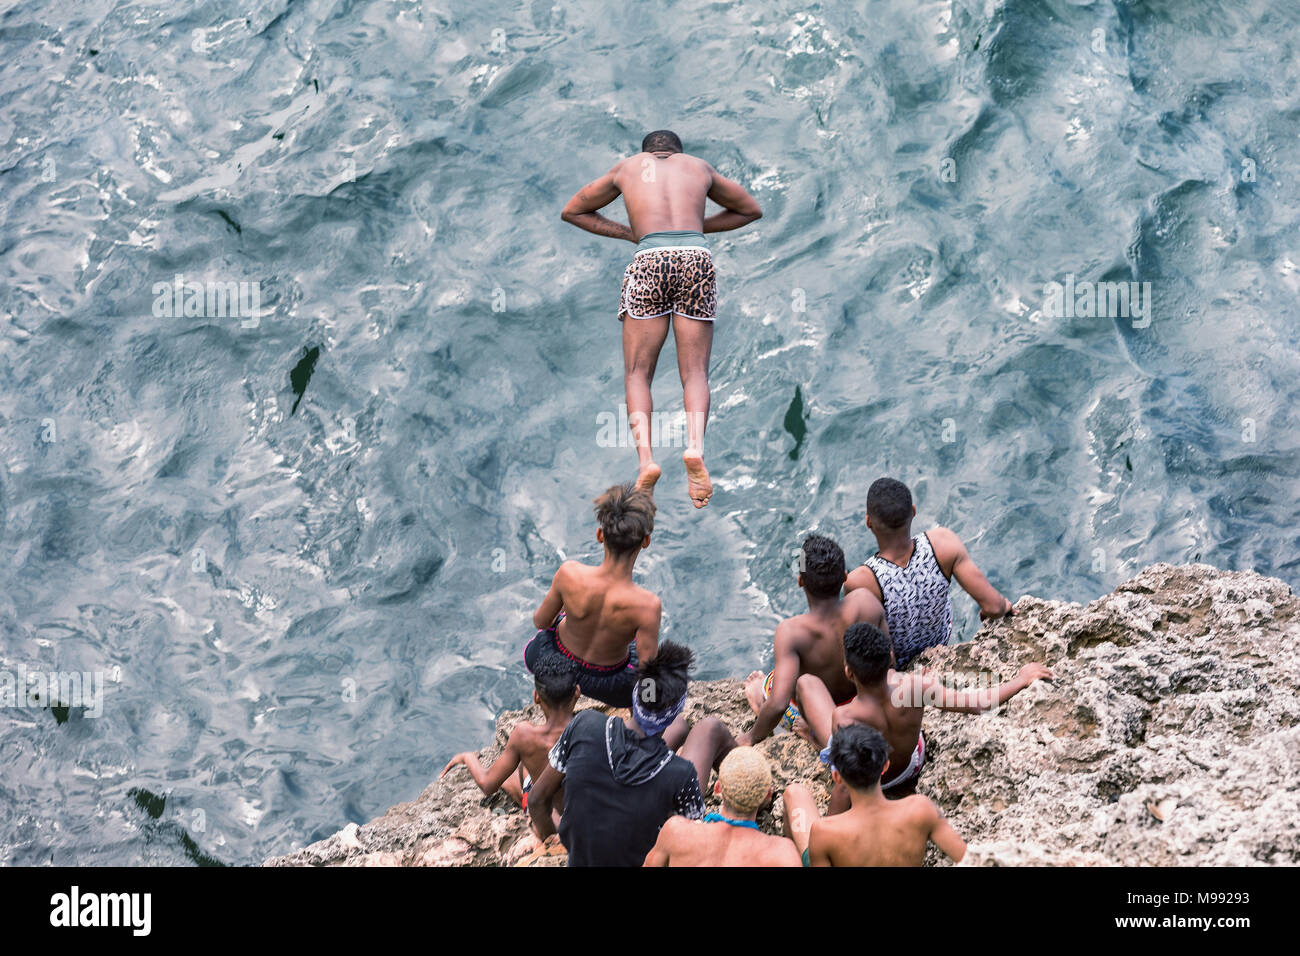 The boys from Havana are jumping from the rocks into the sea. Cuba, Havana. Jump, danger. Young Cubans gather jumping from rock to the sea. Stock Photo